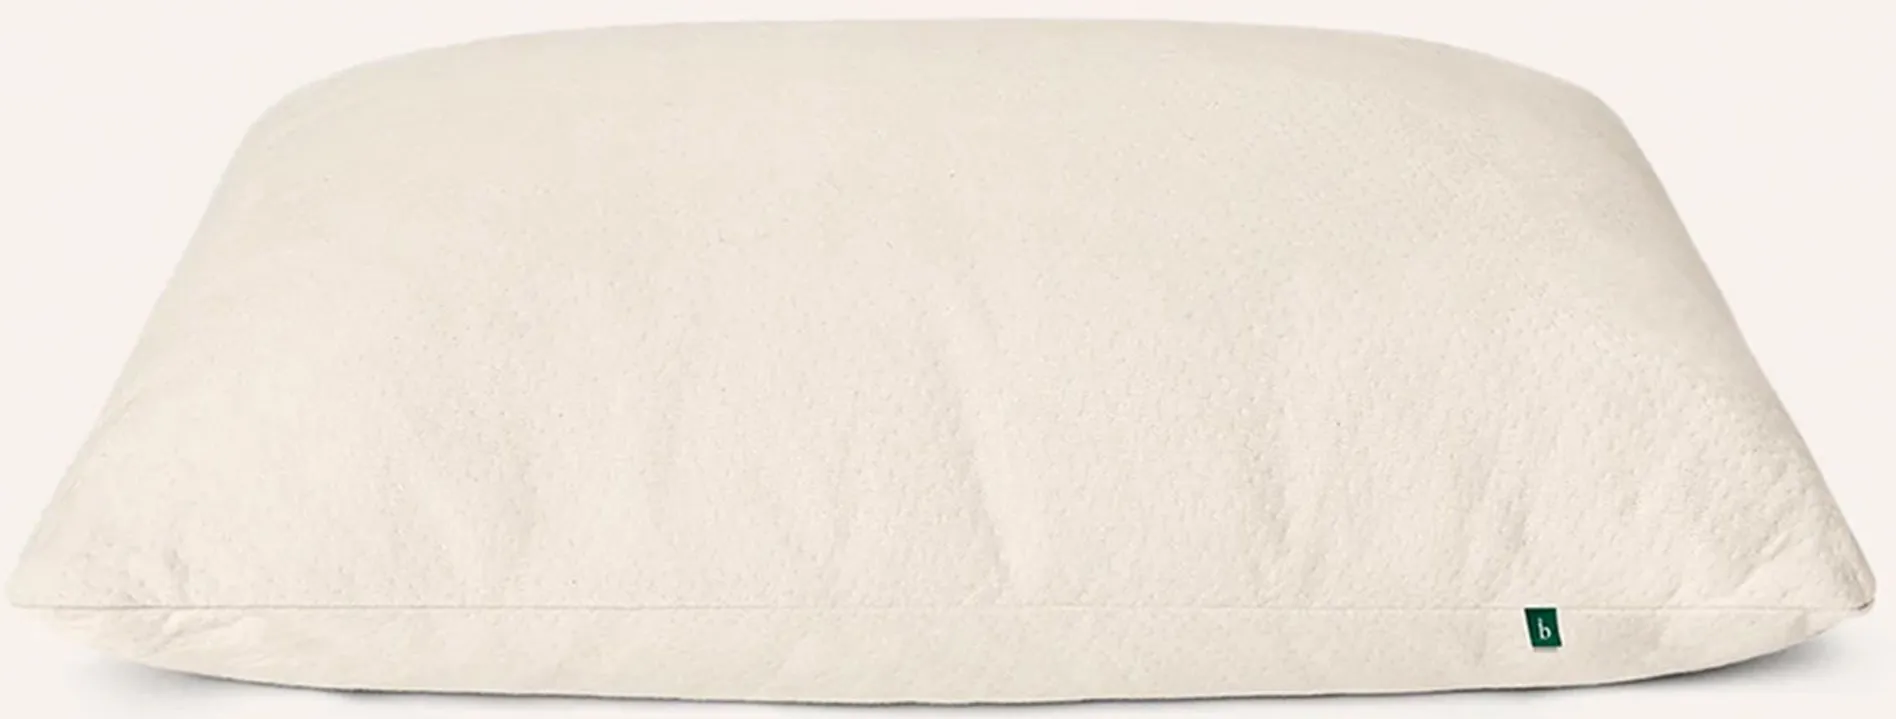 Birch Organic Pillow in Natural by Helix Sleep